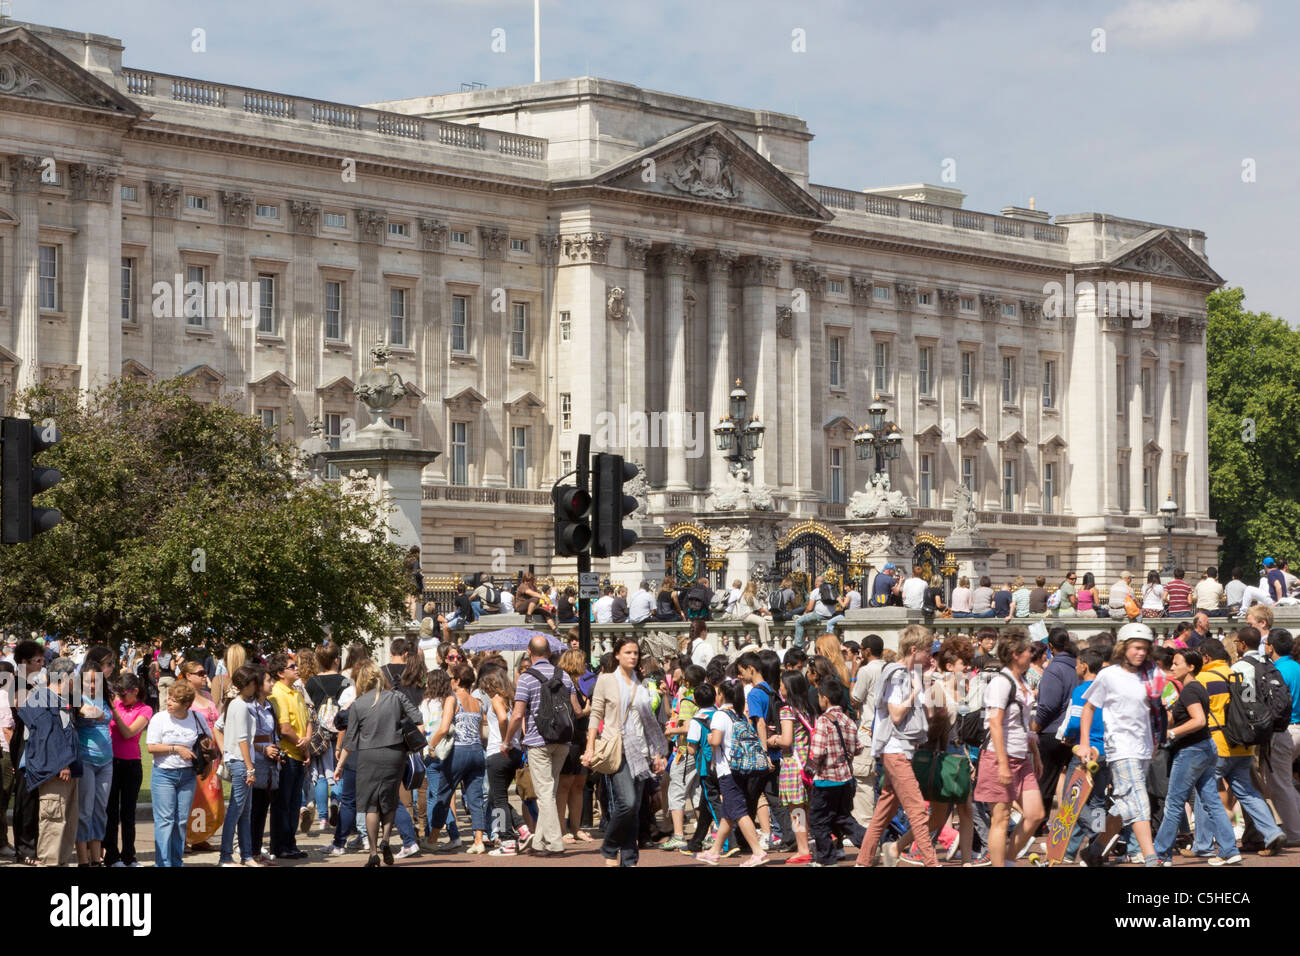 Crowds of Tourists at Buckingham Palace crossing the road just before the start of the changing of the guard ceremony Stock Photo